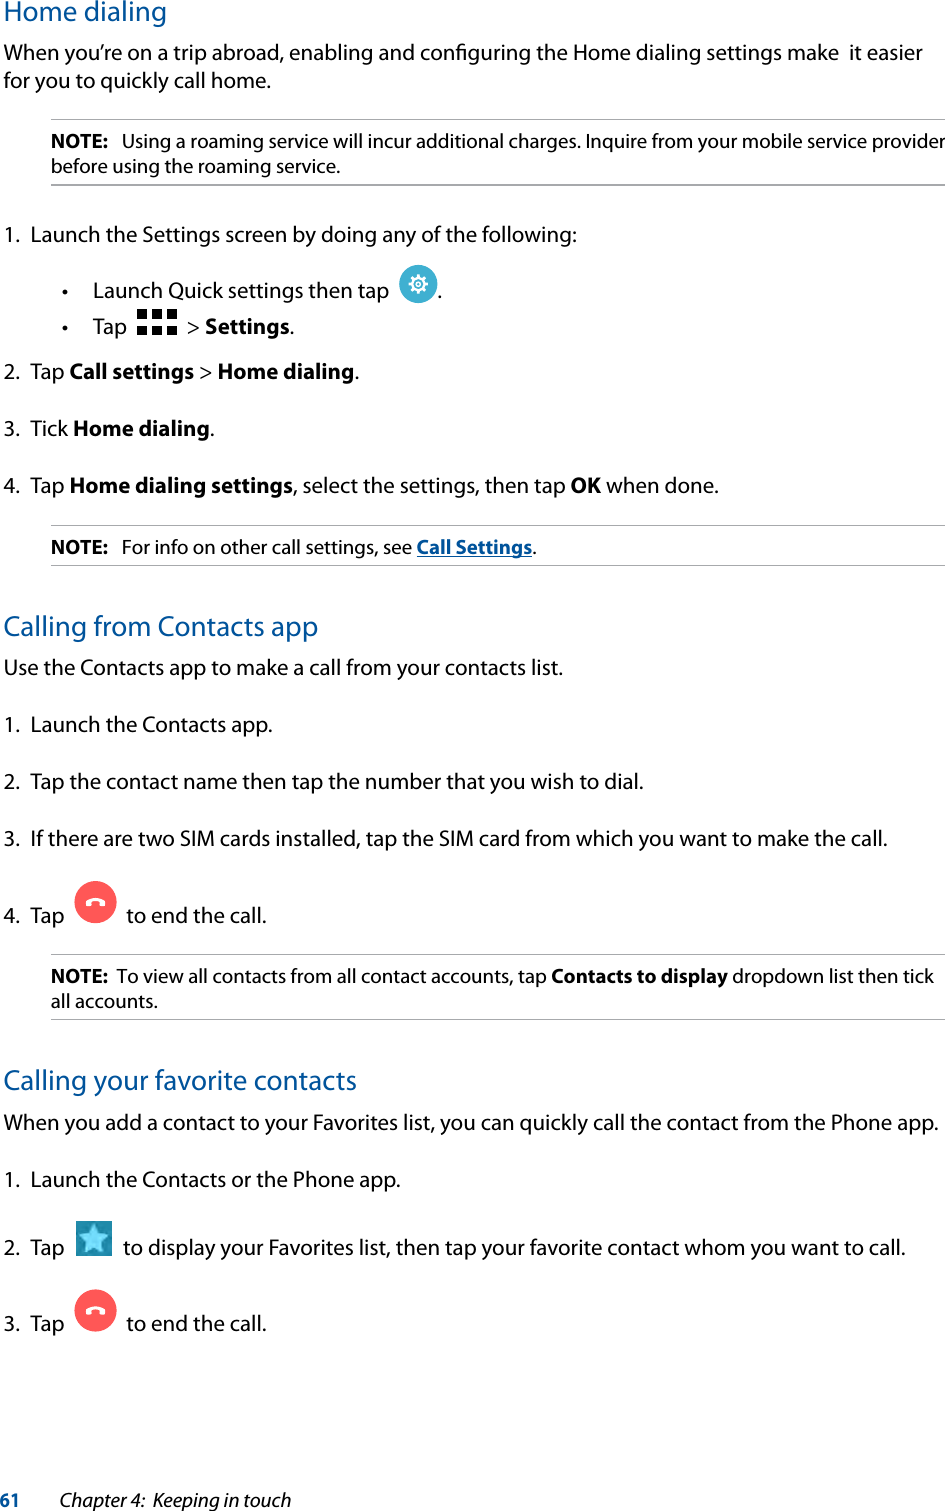 61Chapter 4:  Keeping in touchHome dialingWhen you’re on a trip abroad, enabling and conﬁguring the Home dialing settings make  it easier for you to quickly call home.NOTE:  Using a roaming service will incur additional charges. Inquire from your mobile service provider before using the roaming service.1.  Launch the Settings screen by doing any of the following: Launch Quick settings then tap   .   Tap     &gt; Settings.2. Tap Call settings &gt; Home dialing.3. Tick Home dialing.4. Tap Home dialing settings, select the settings, then tap OK when done.NOTE:  For info on other call settings, see Call Settings.Calling from Contacts appUse the Contacts app to make a call from your contacts list.1.  Launch the Contacts app.2.  Tap the contact name then tap the number that you wish to dial.3.  If there are two SIM cards installed, tap the SIM card from which you want to make the call.4.  Tap     to end the call.NOTE:  To view all contacts from all contact accounts, tap Contacts to display dropdown list then tick all accounts.Calling your favorite contactsWhen you add a contact to your Favorites list, you can quickly call the contact from the Phone app.1.  Launch the Contacts or the Phone app.2.  Tap     to display your Favorites list, then tap your favorite contact whom you want to call.3.  Tap     to end the call.